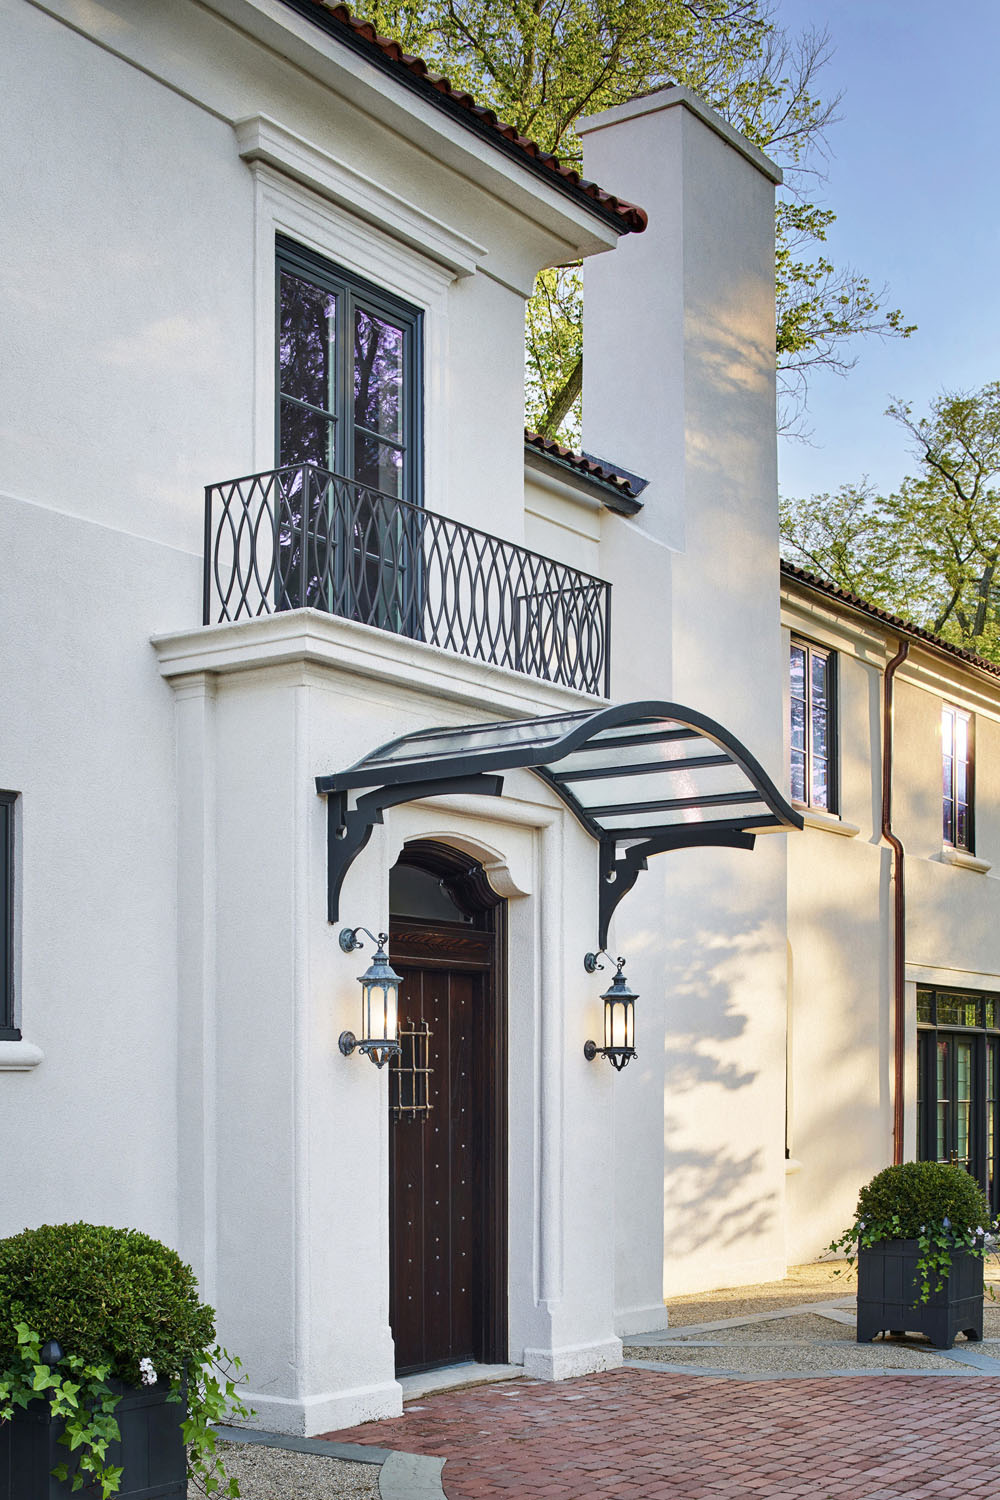 Art Deco Inspired Entrance with Canopy